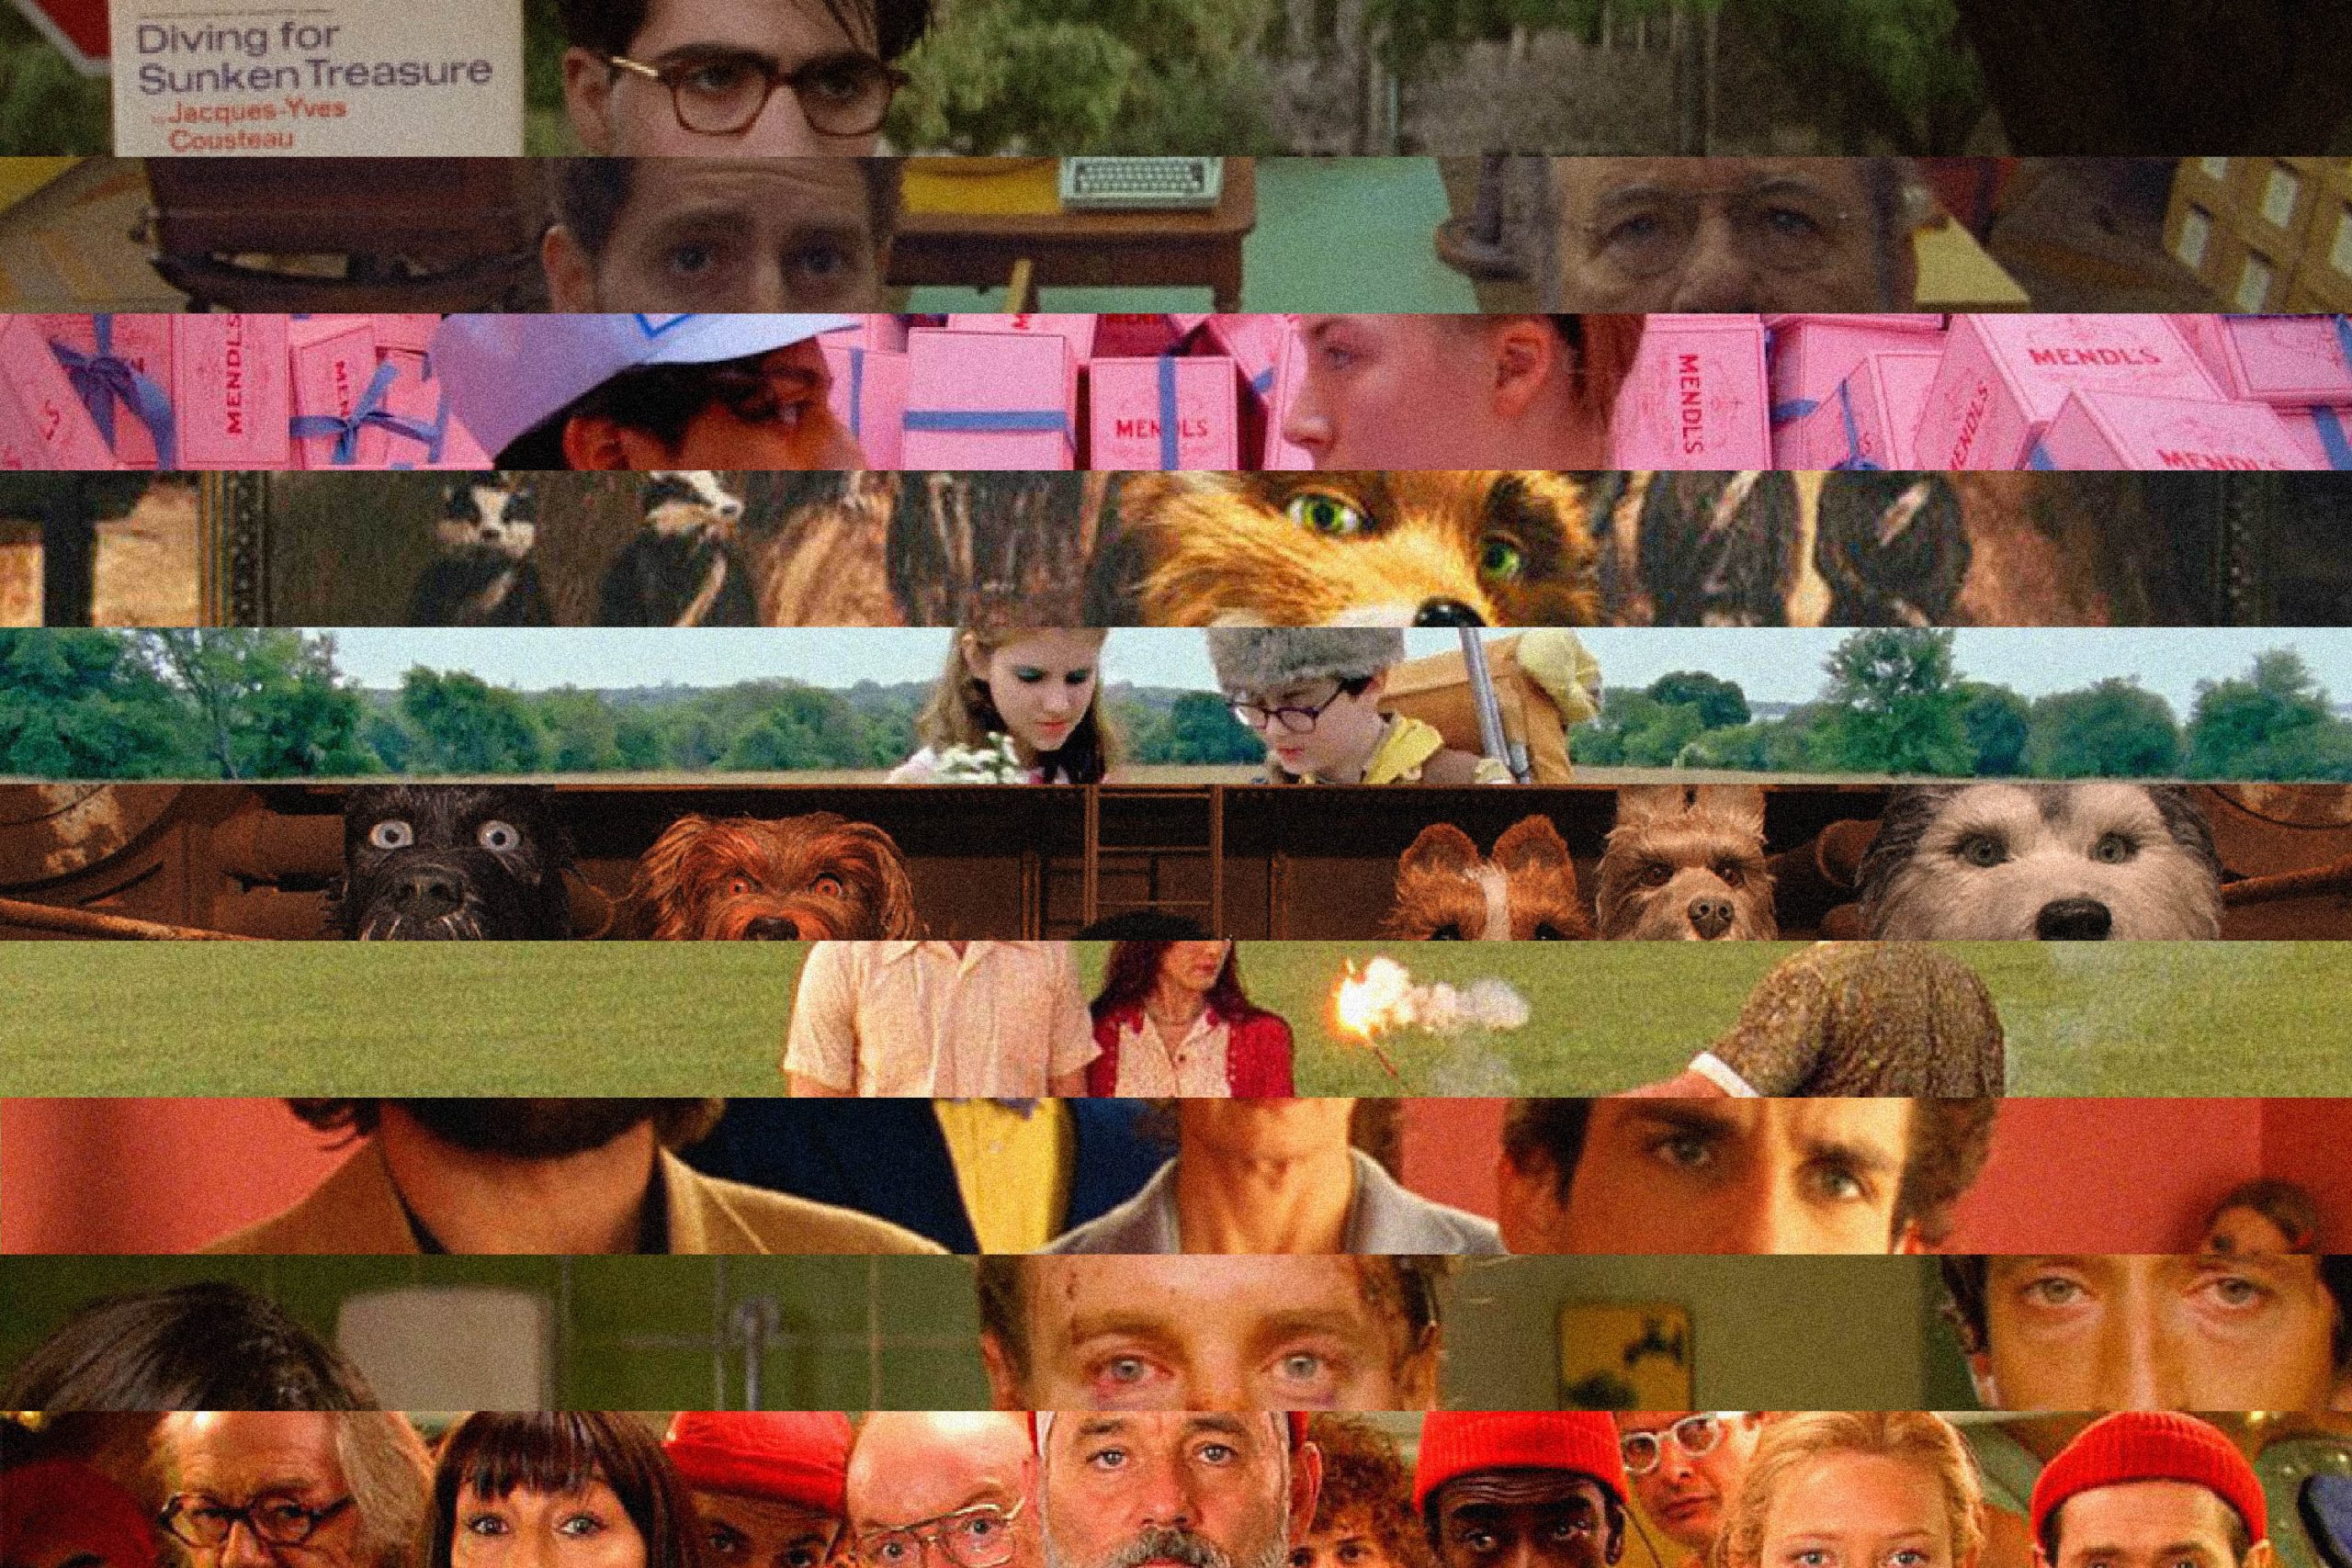 The 10 Best Scenes in The Movies of Wes Anderson